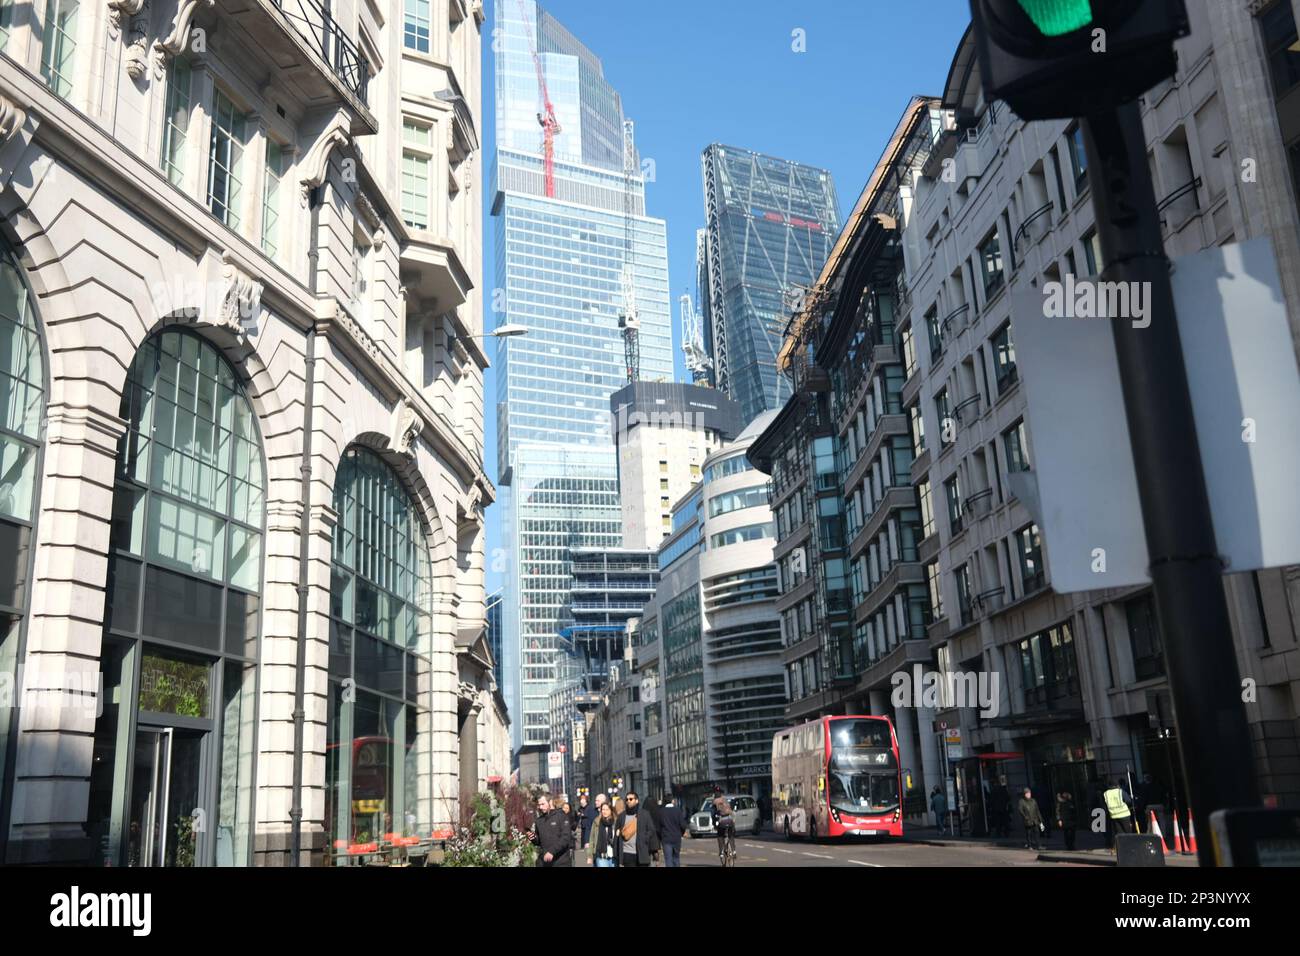 A street scene in central London on a sunny early spring day in March. Noteworthy architecture abounds in a blend of old and new Stock Photo